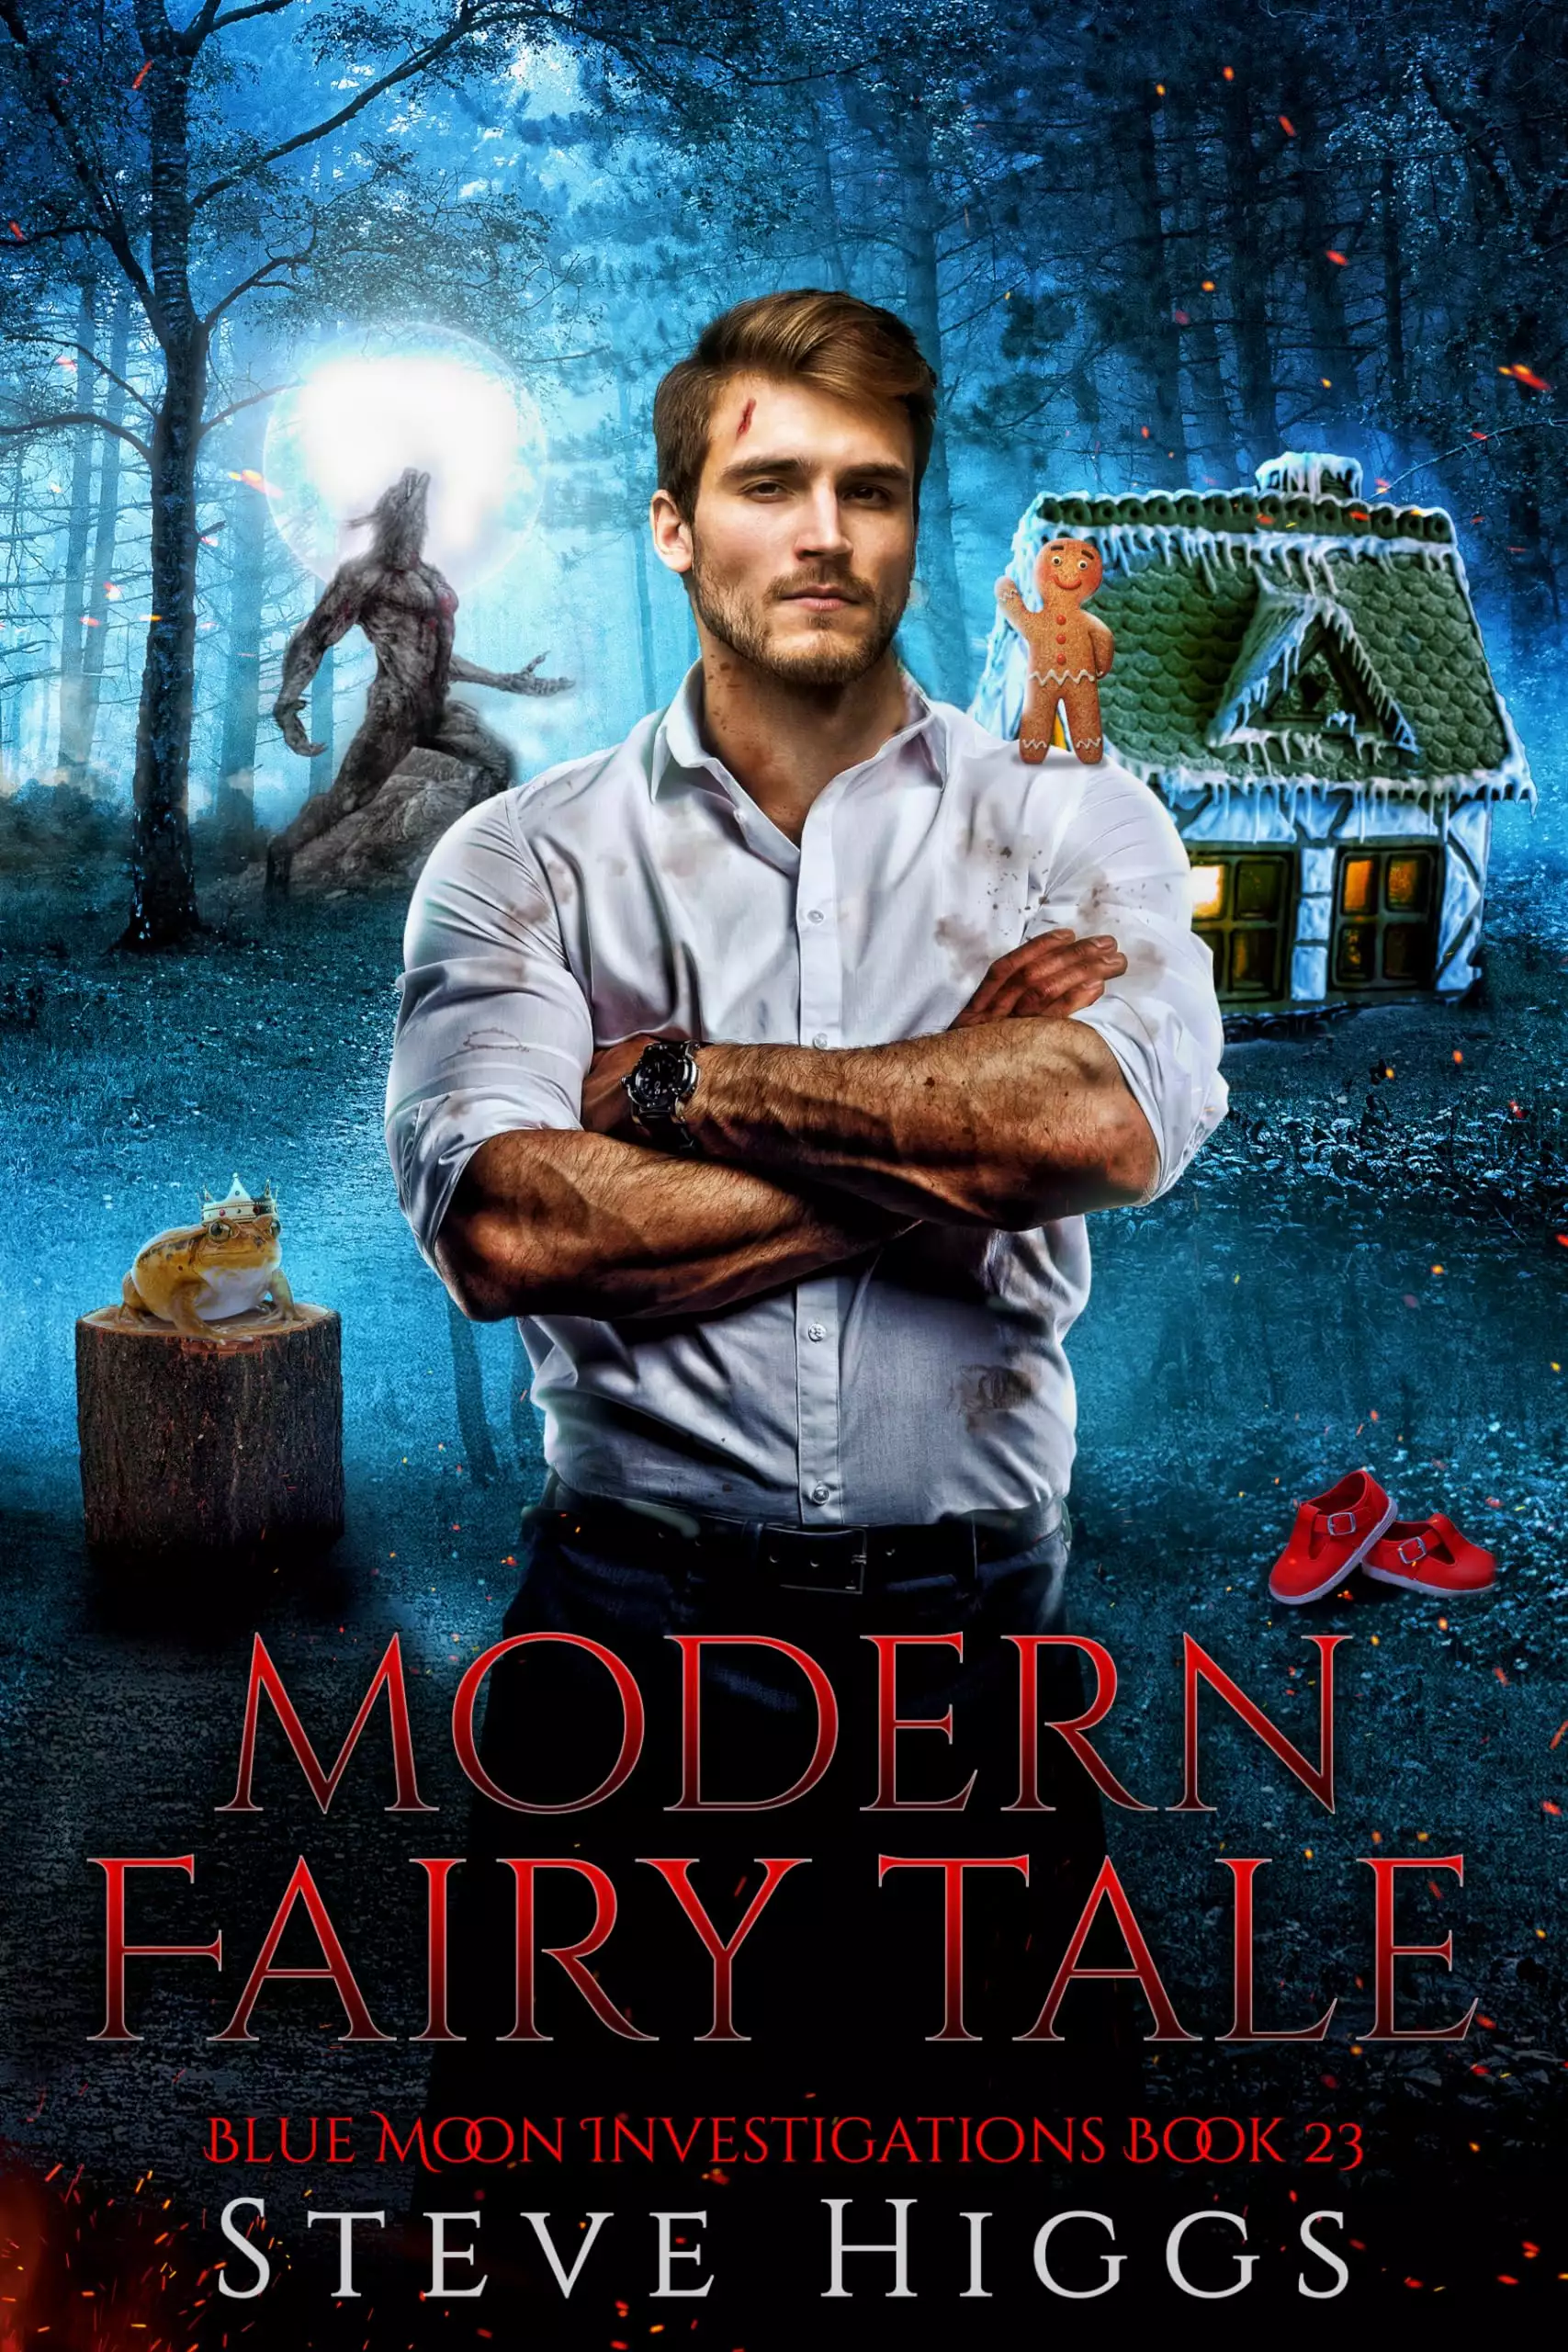 Modern Fairy Tale: Blue Moon Investigations Book 23